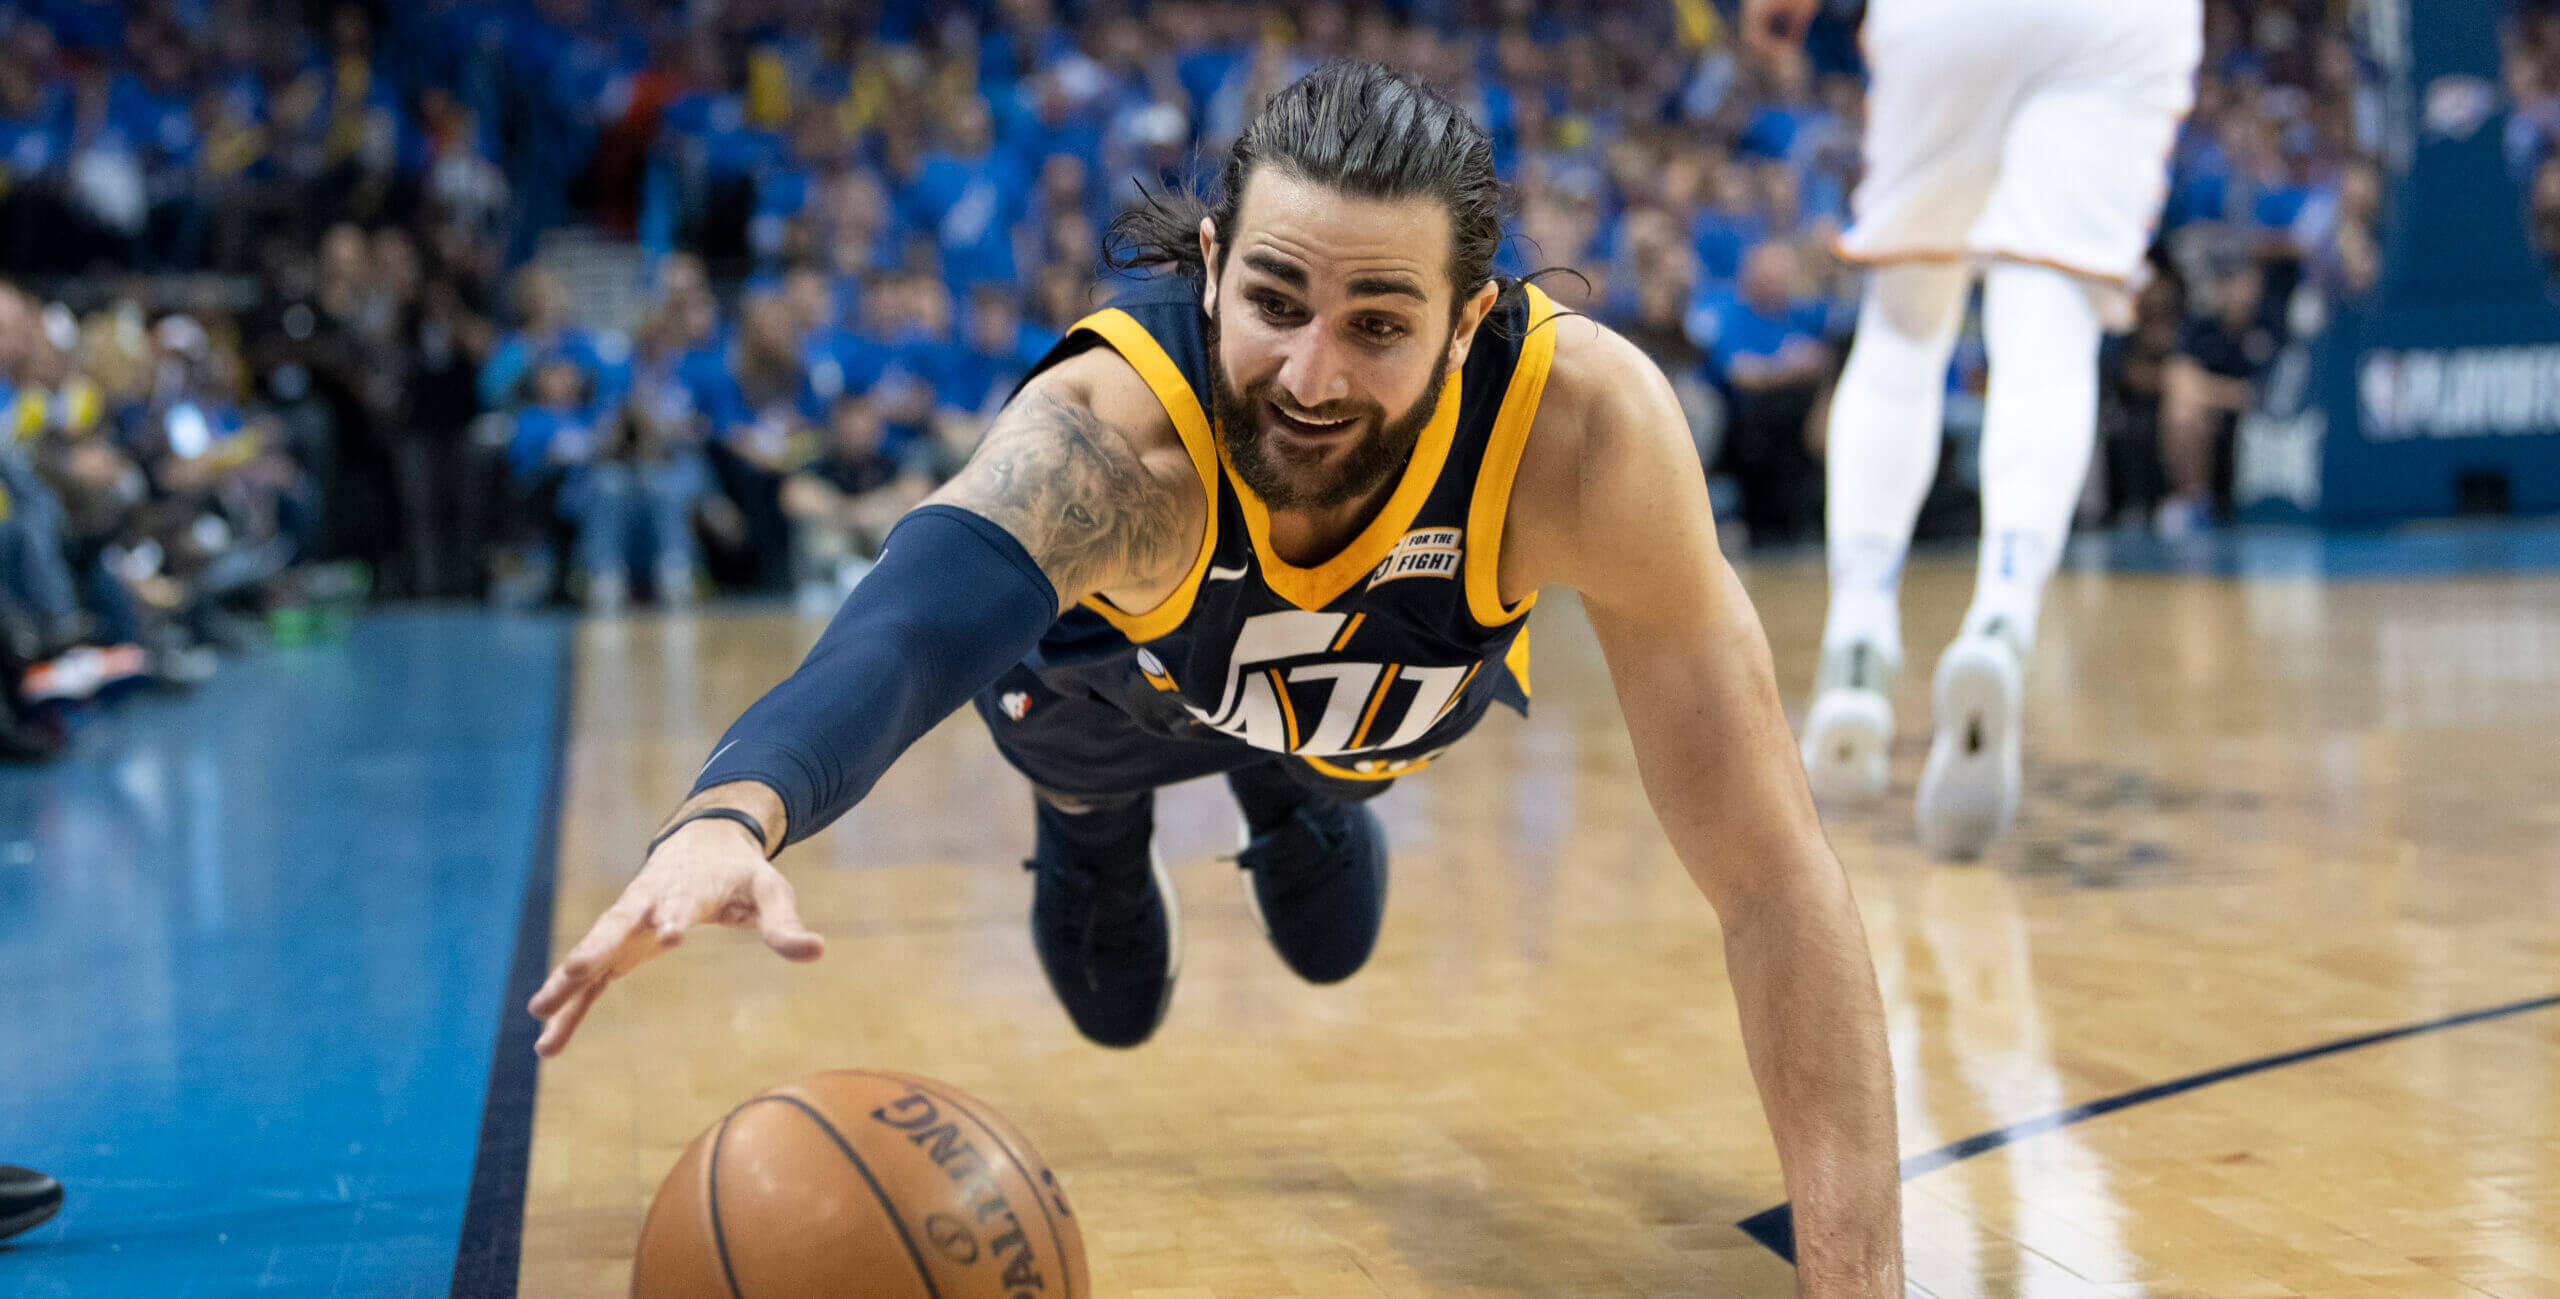 Ricky Rubio diving to save a ball from going out of bounds